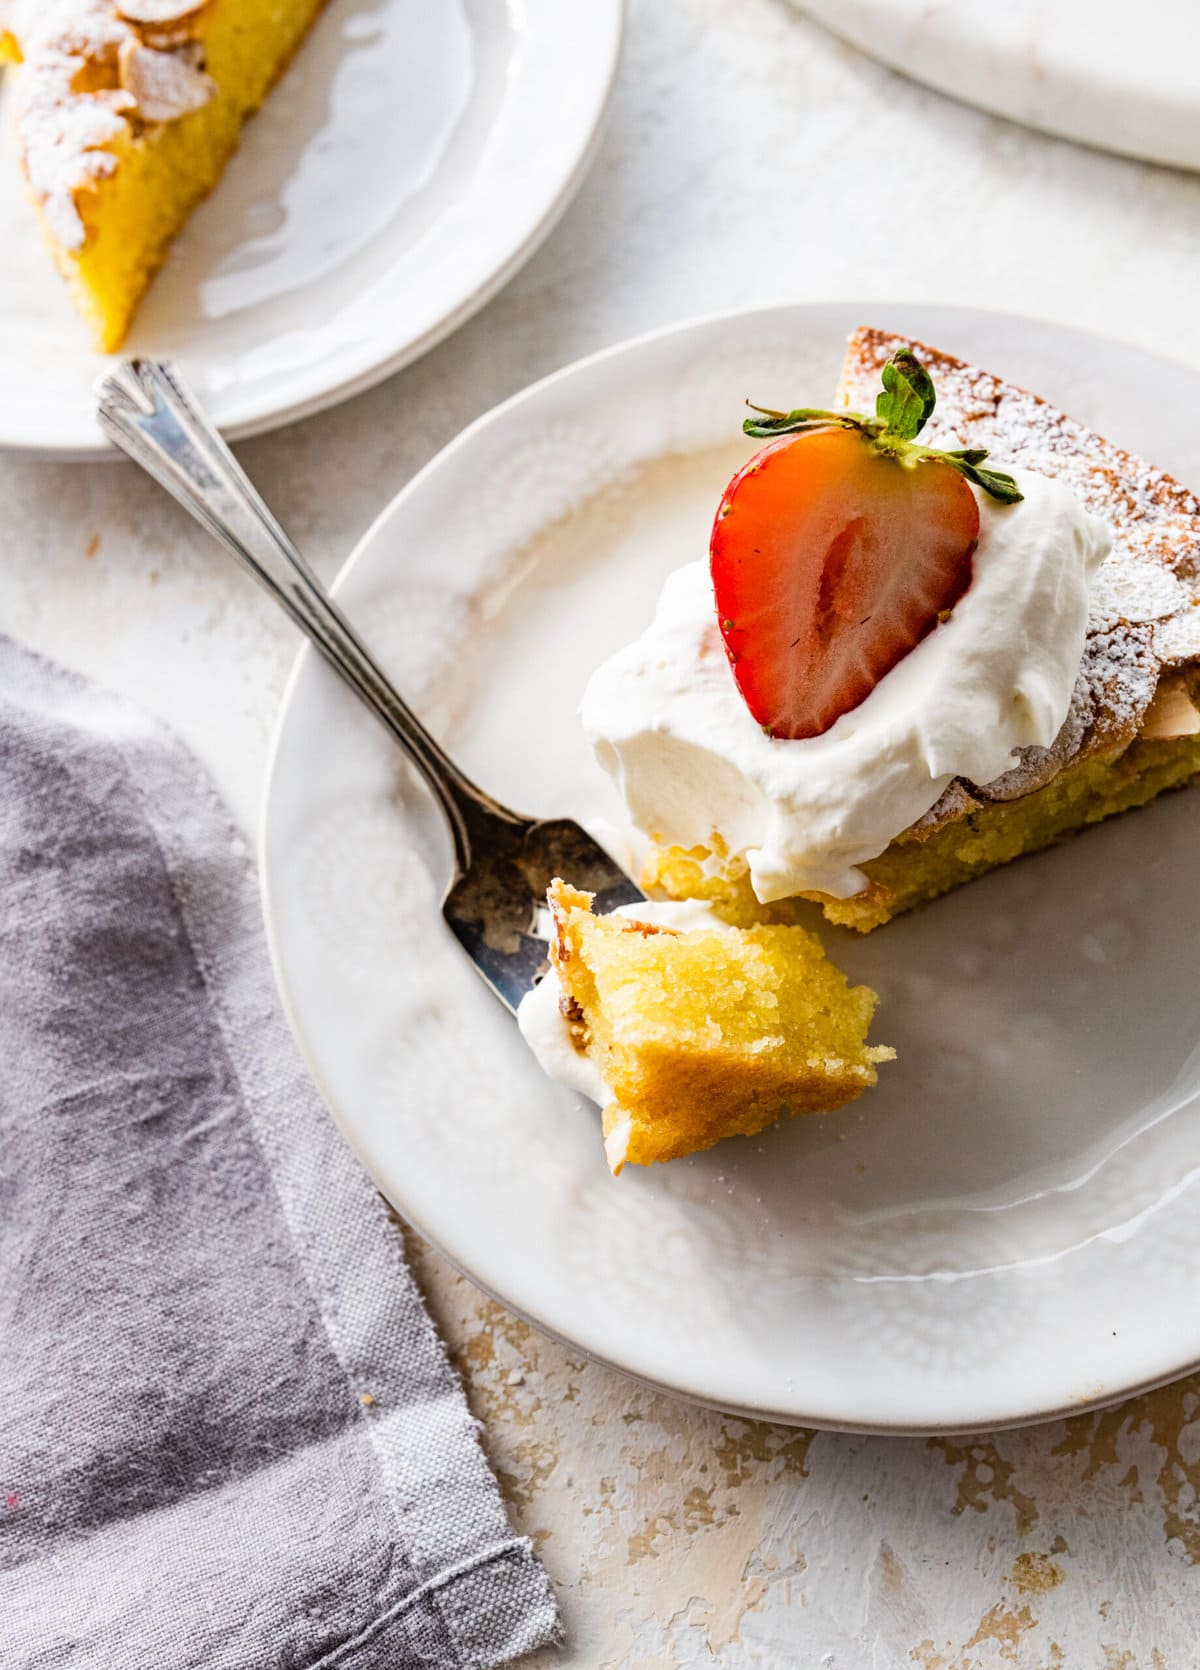 easy almond cake recipe on a plate with a fork taking a bite. Cake topped with whipped cream and strawberry.